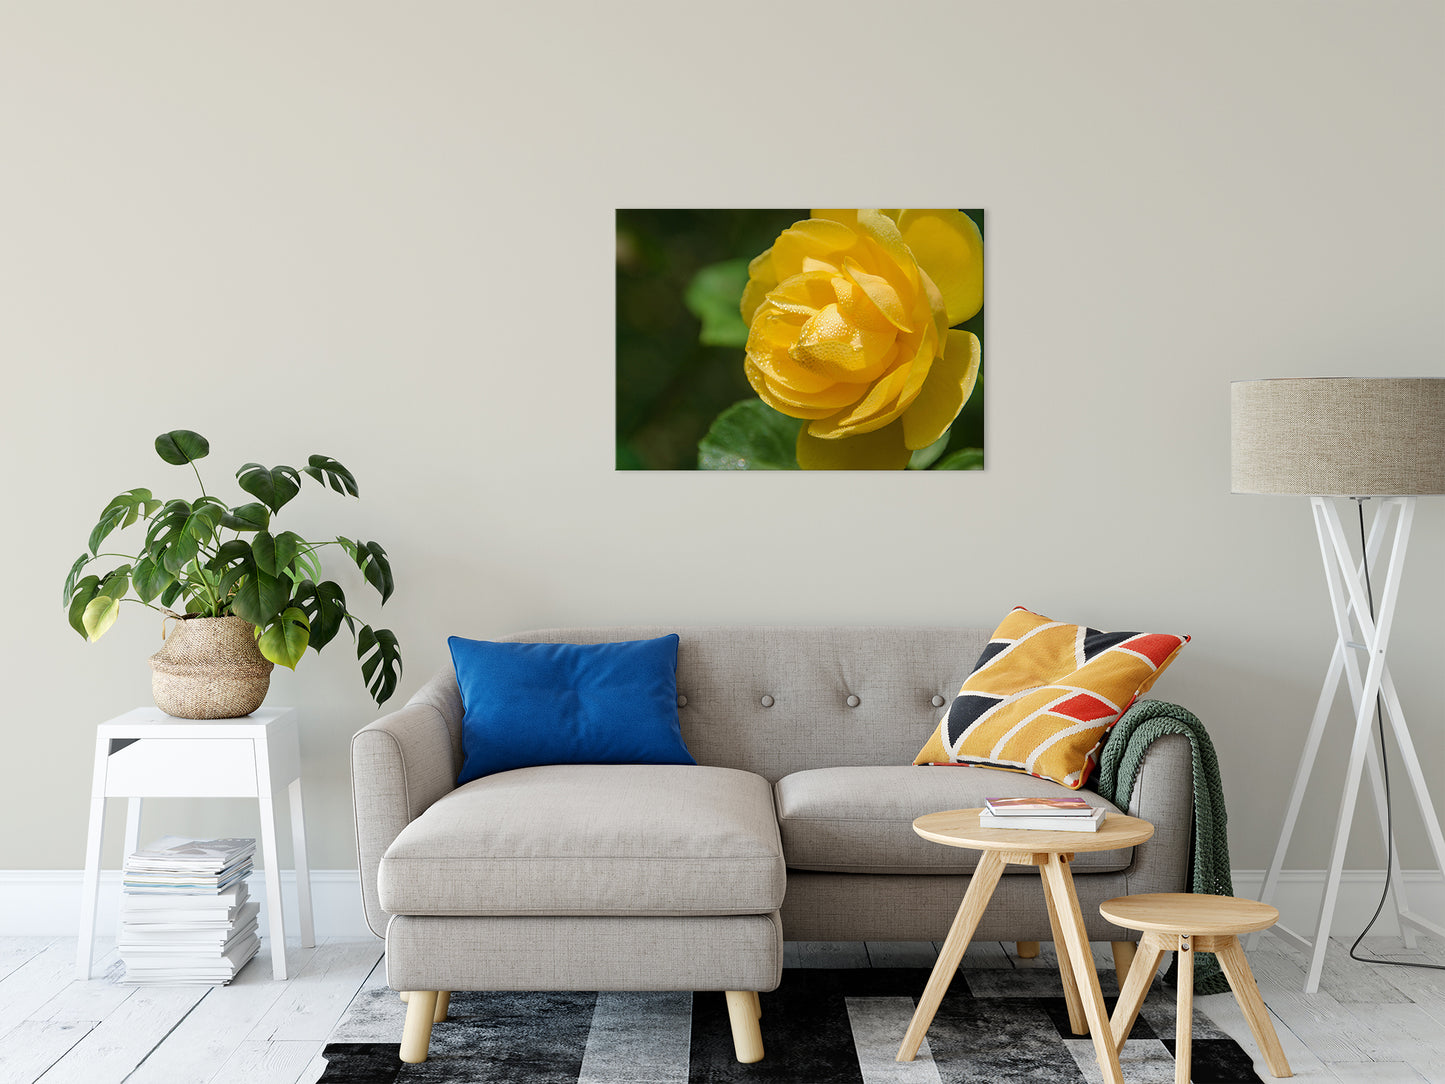 Friendship Rose Nature / Floral Photo Fine Art Canvas Wall Art Prints 24" x 36" - PIPAFINEART